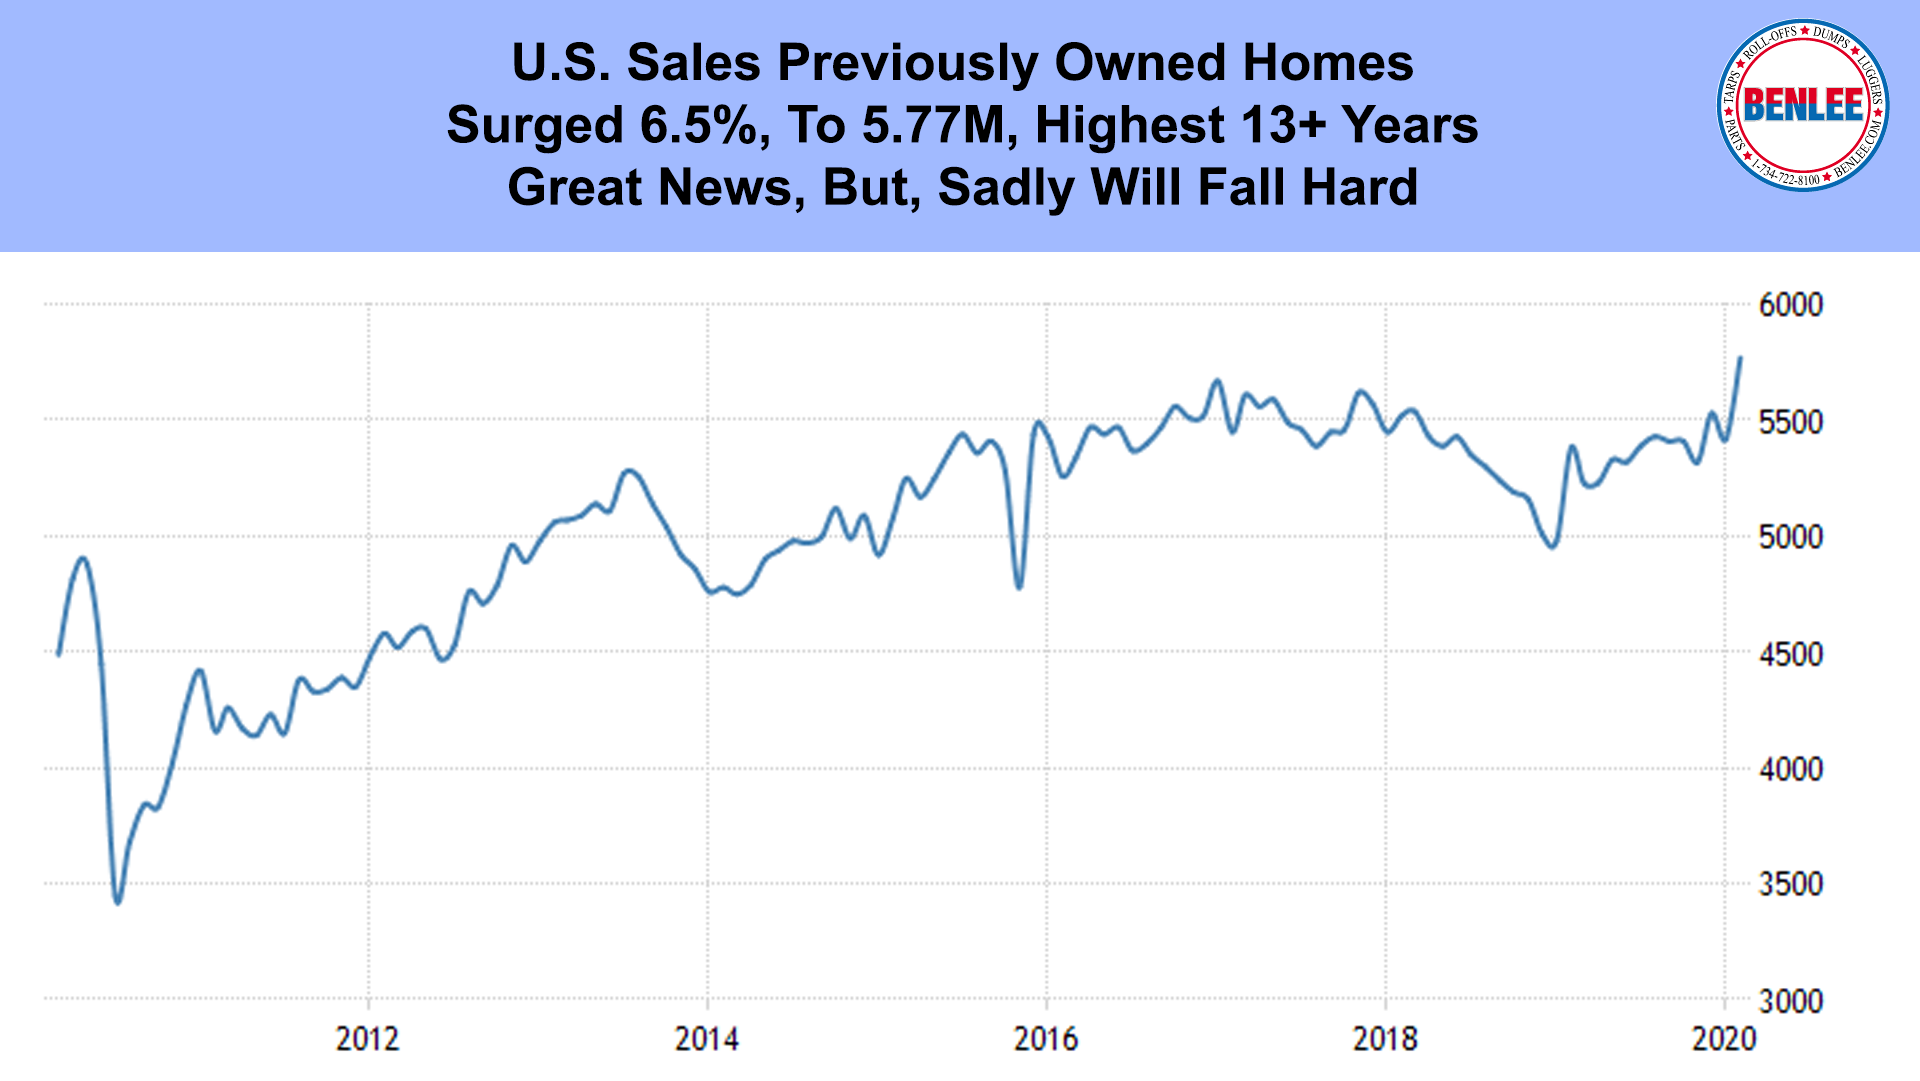 U.S. Sales Previously Owned Homes